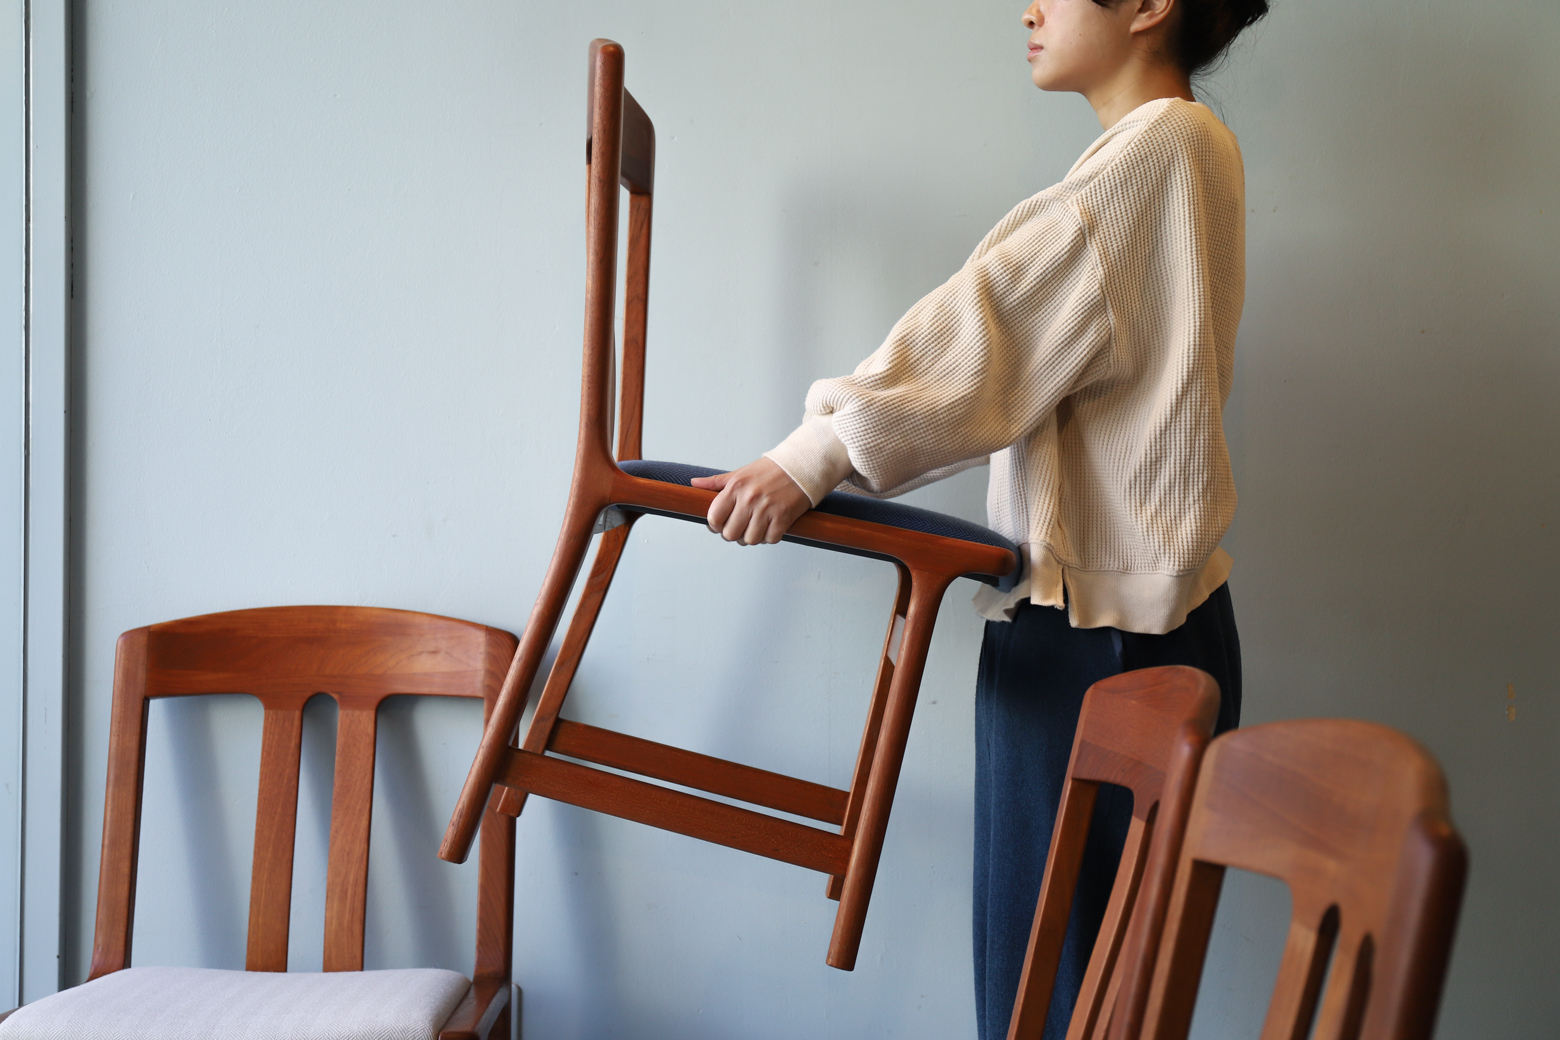 Danish Vintage L.Olsen&Son Dining Chair Re-Covering/デンマーク ヴィンテージ L.オルセン&サン ダイニング チェア 北欧家具 張替済み